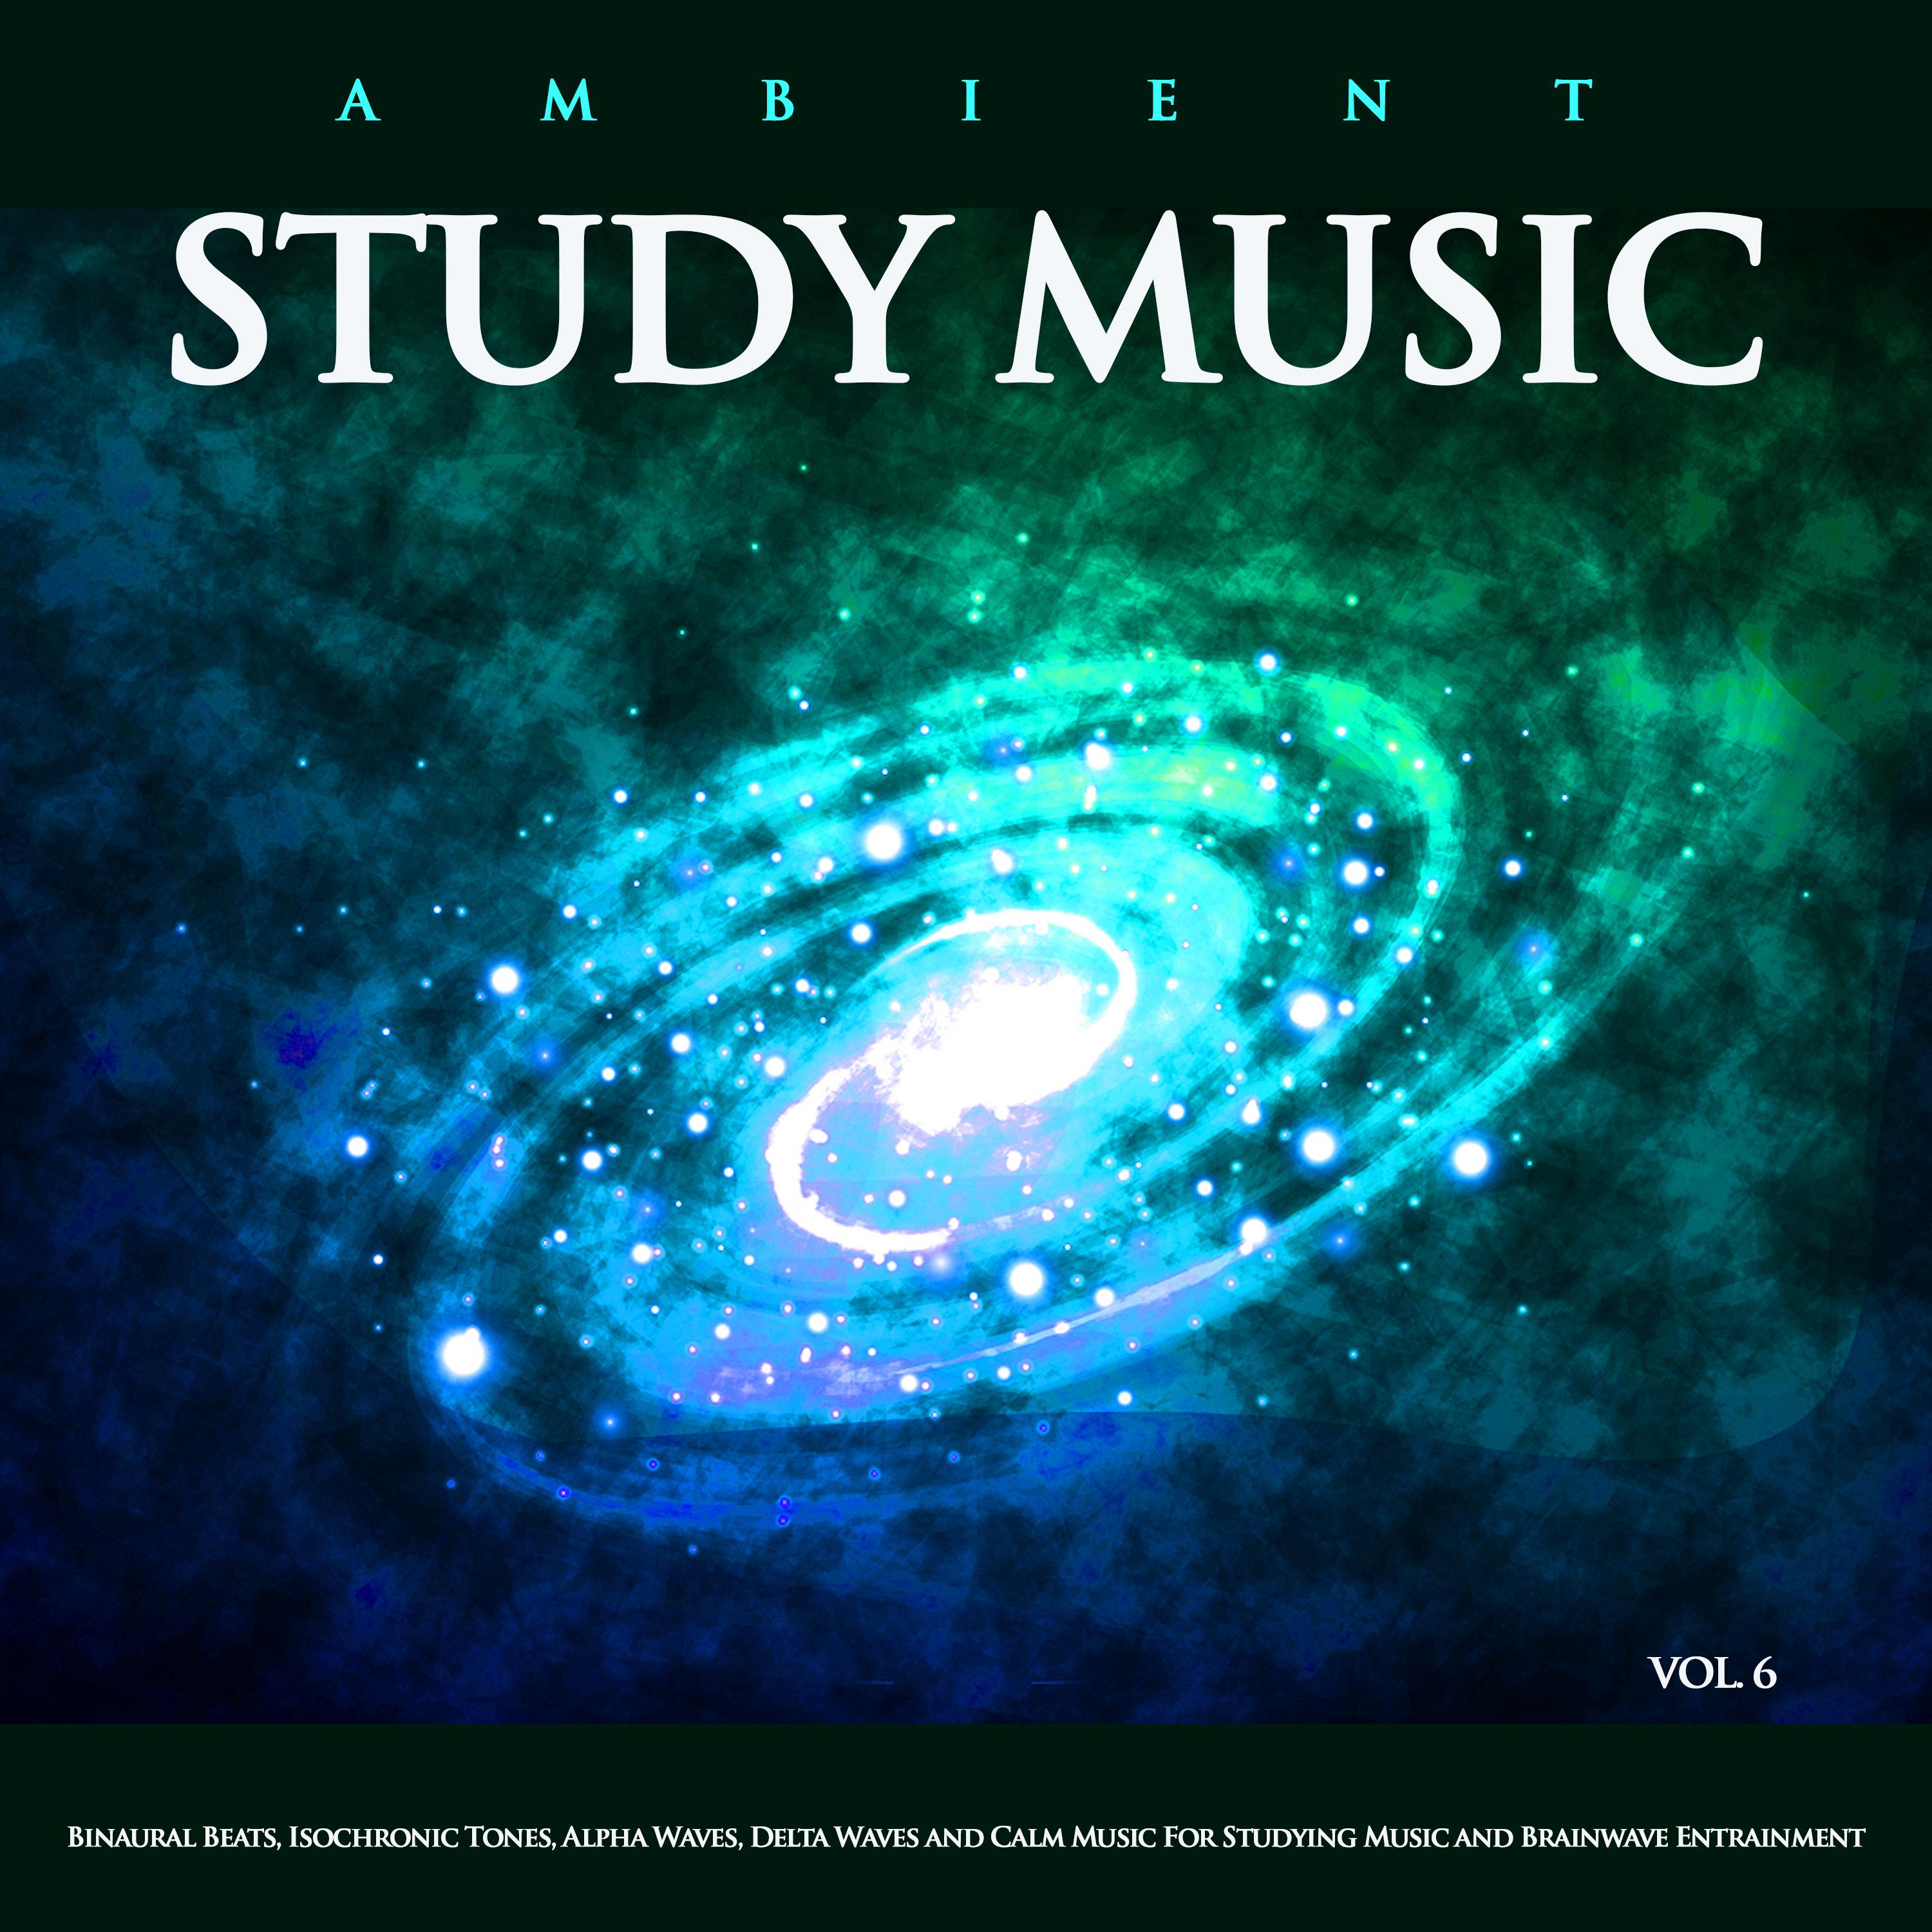 Binaural Beats and Isochronic Tones For Study